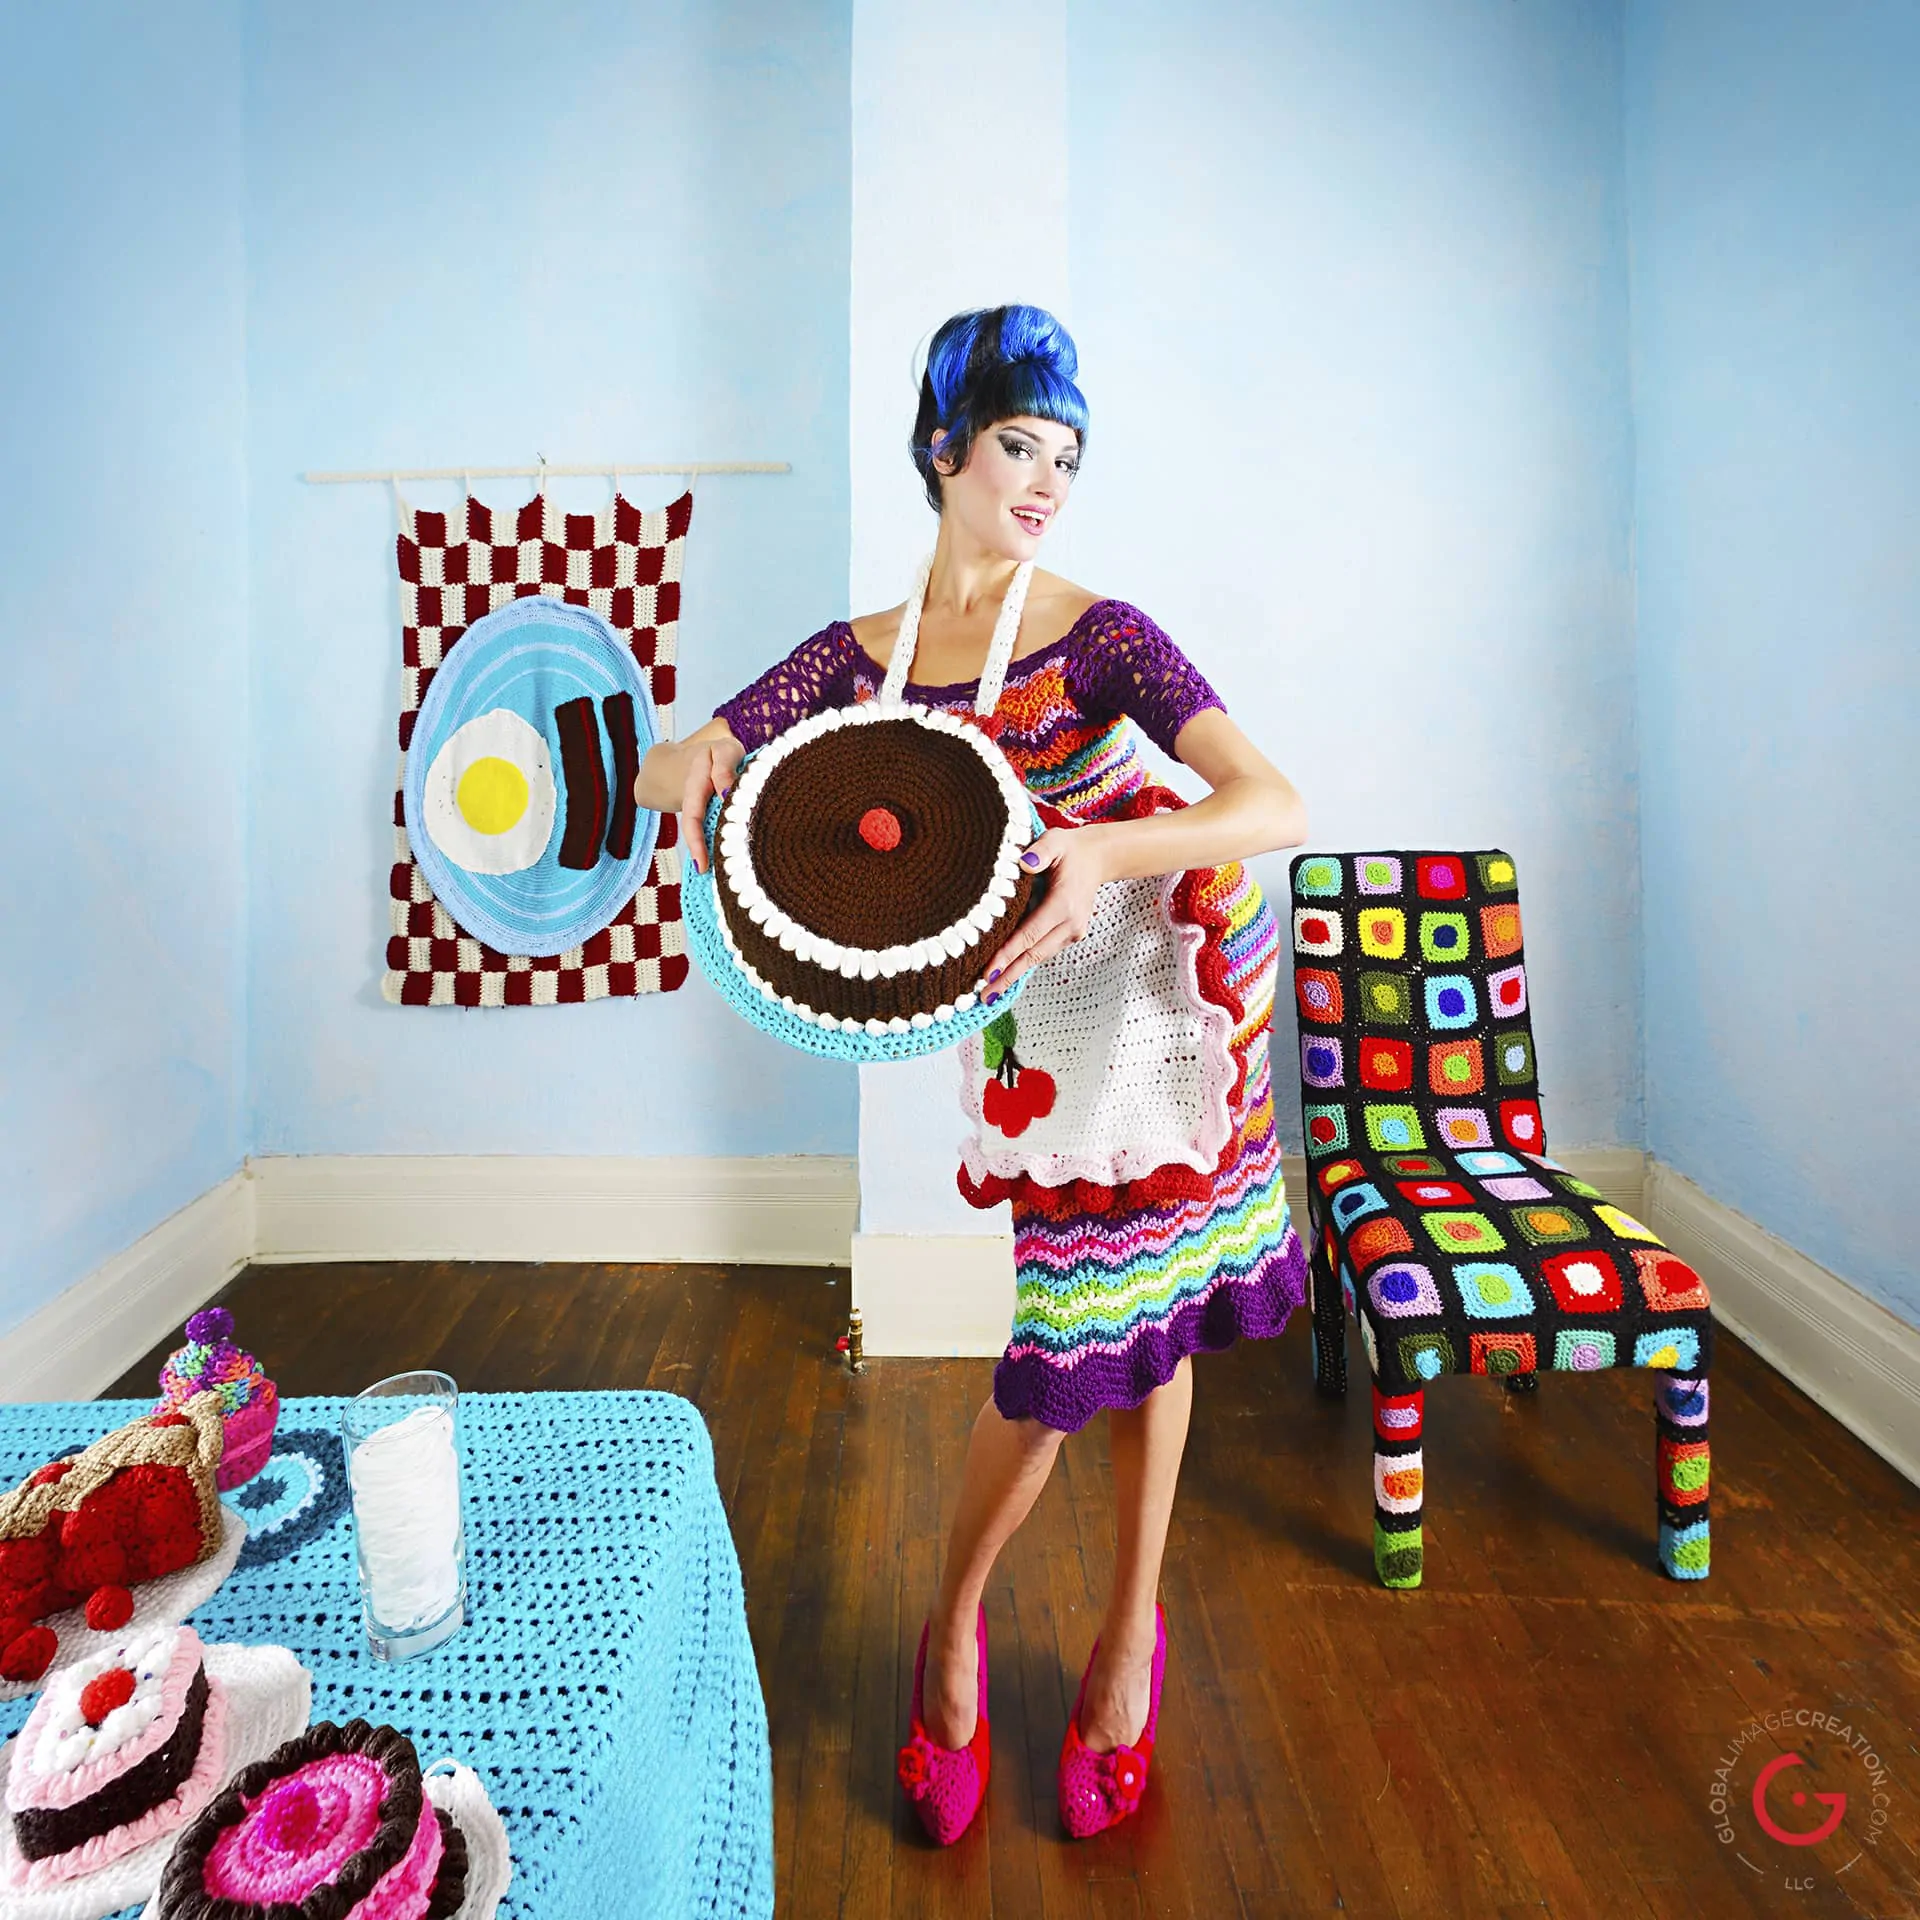 Yarnography - Colorful Characters in Crochet Art by Gina Gallina - Photography Concepts by Jeremy Mason McGraw